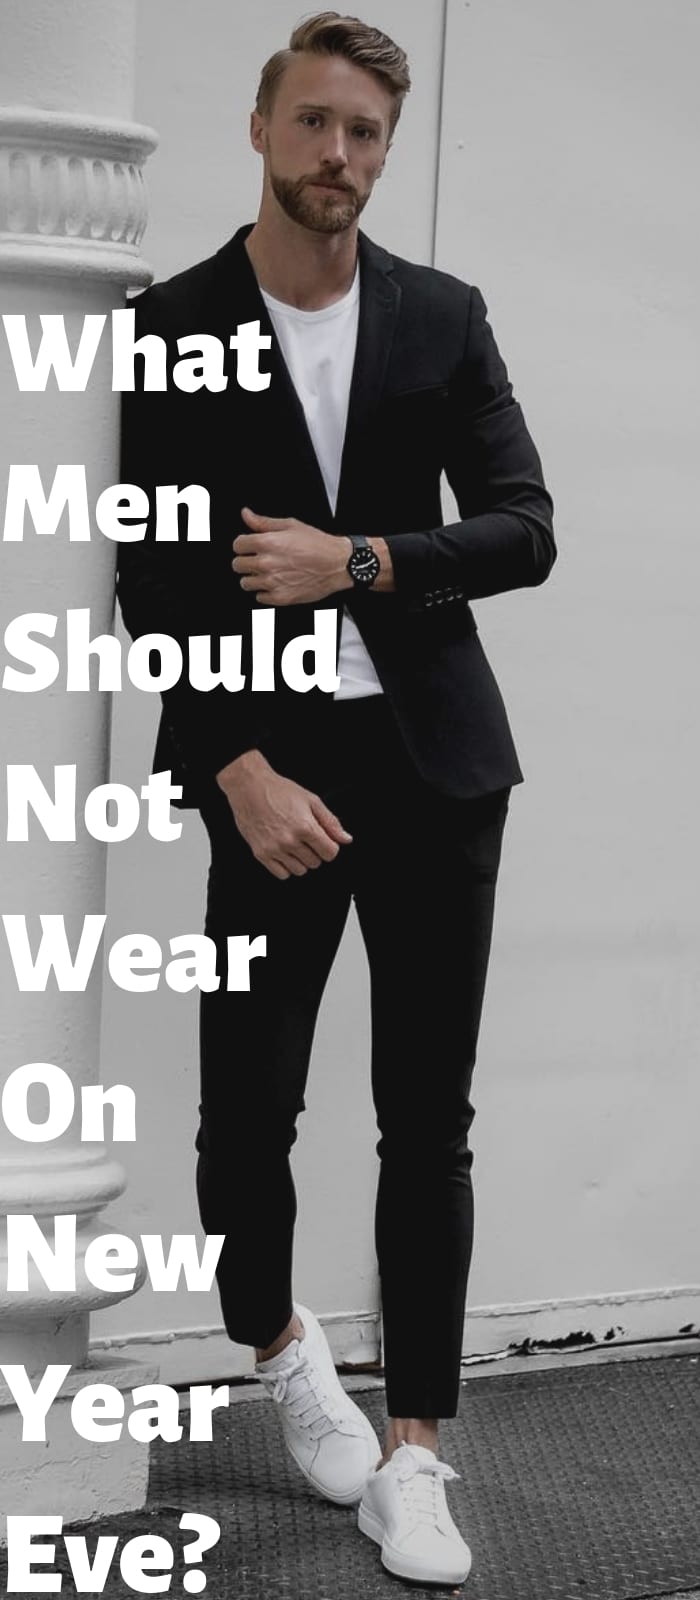 What Men Should Not Wear On New Year Eve.